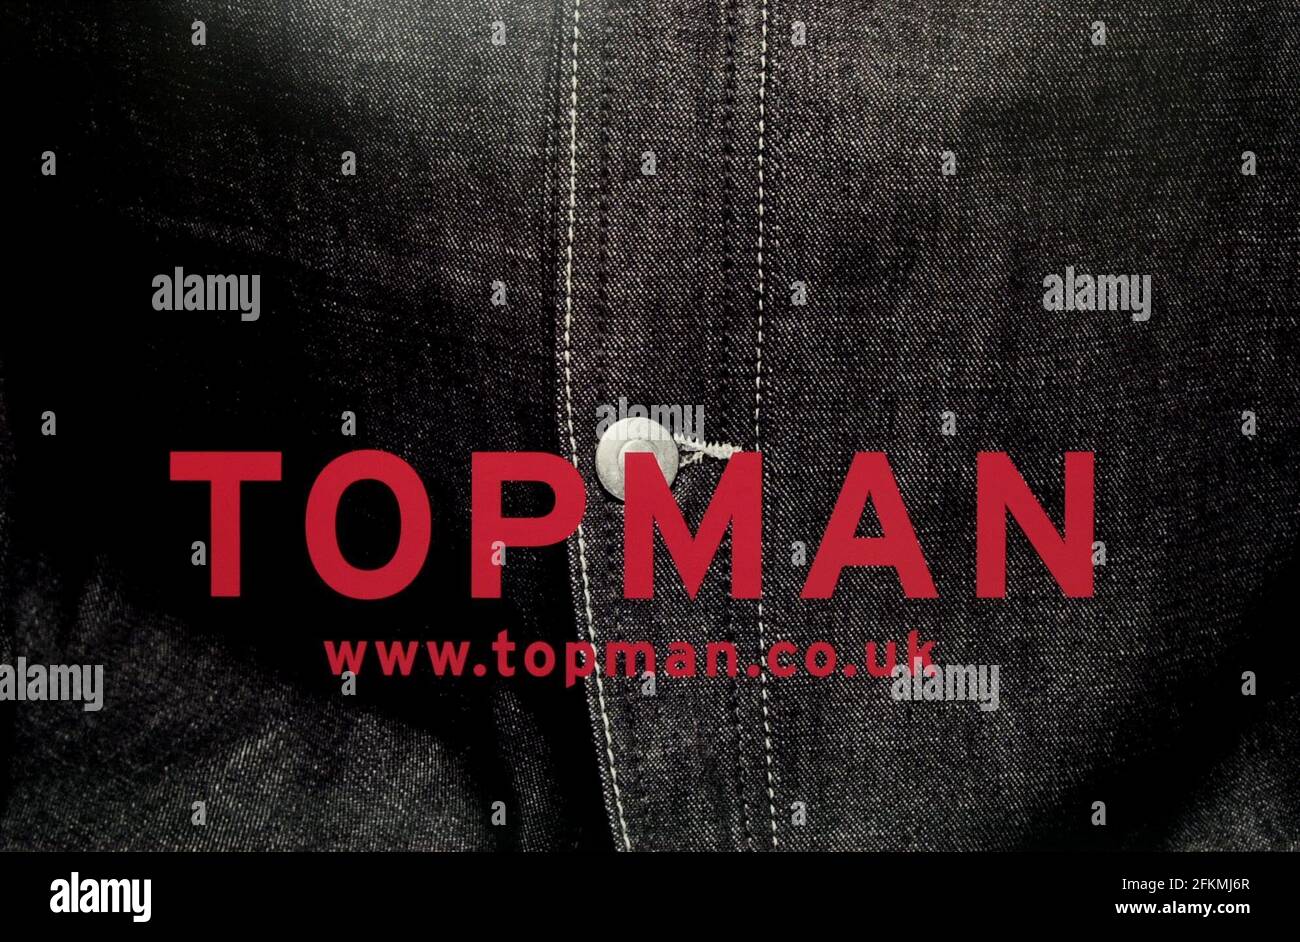 Top Man - Fashion Retail Store in Oxford Street, London.  July 2001and Web Site - www.topman.co.uk Stock Photo